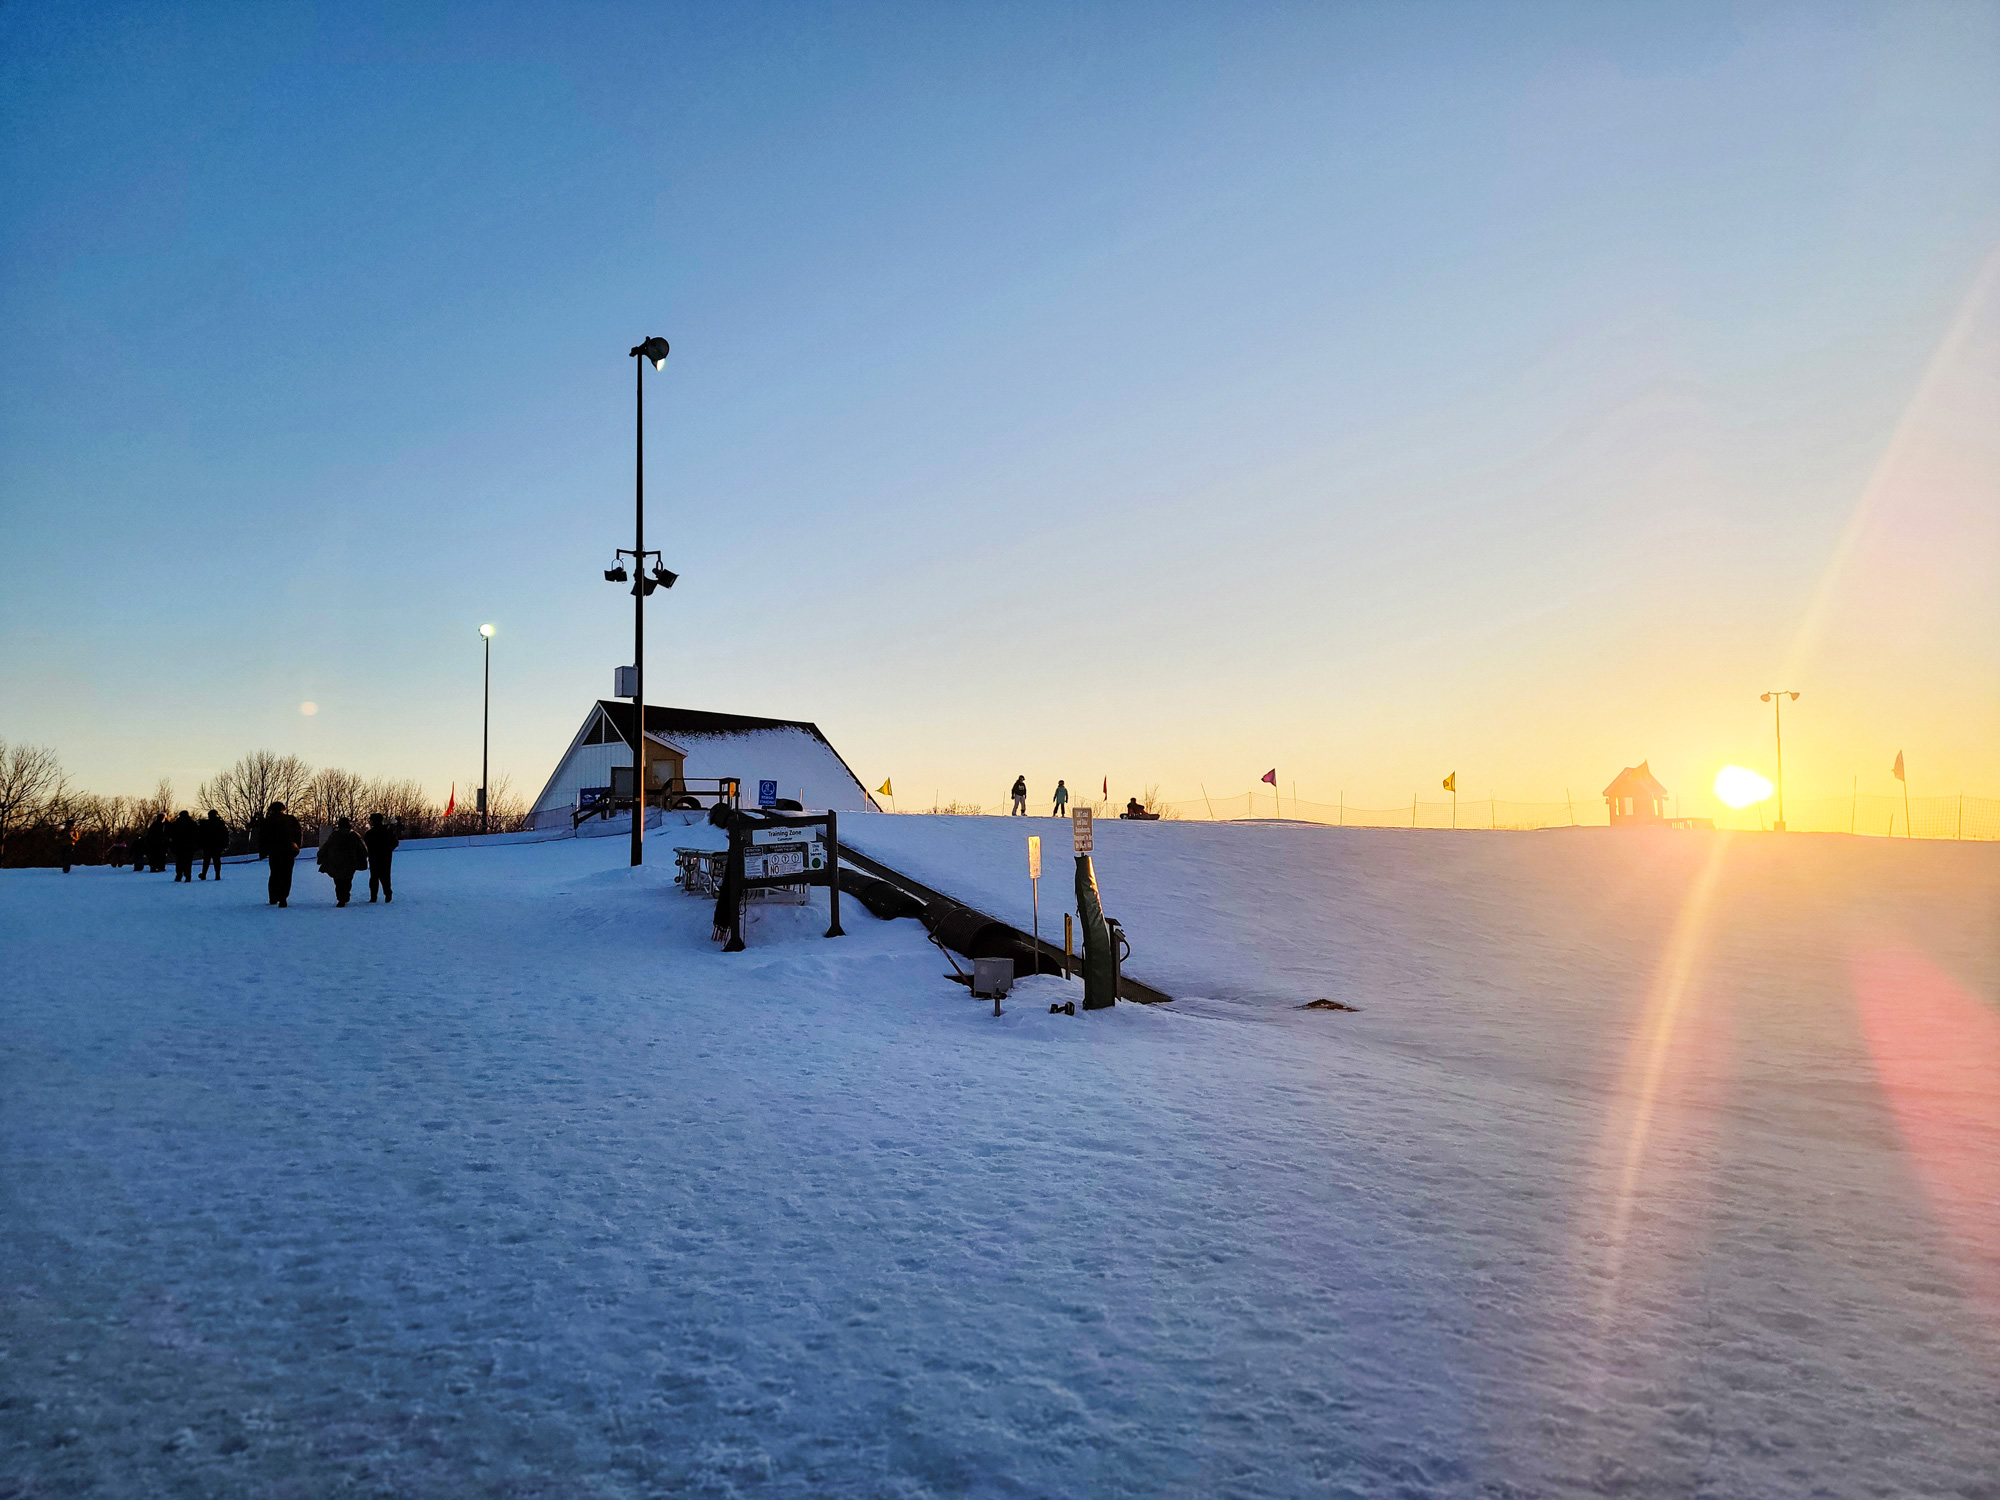 A landscape photograph of a snowy hill, there is a hut in the background and a jump in the middle ground. The sun is setting in the background